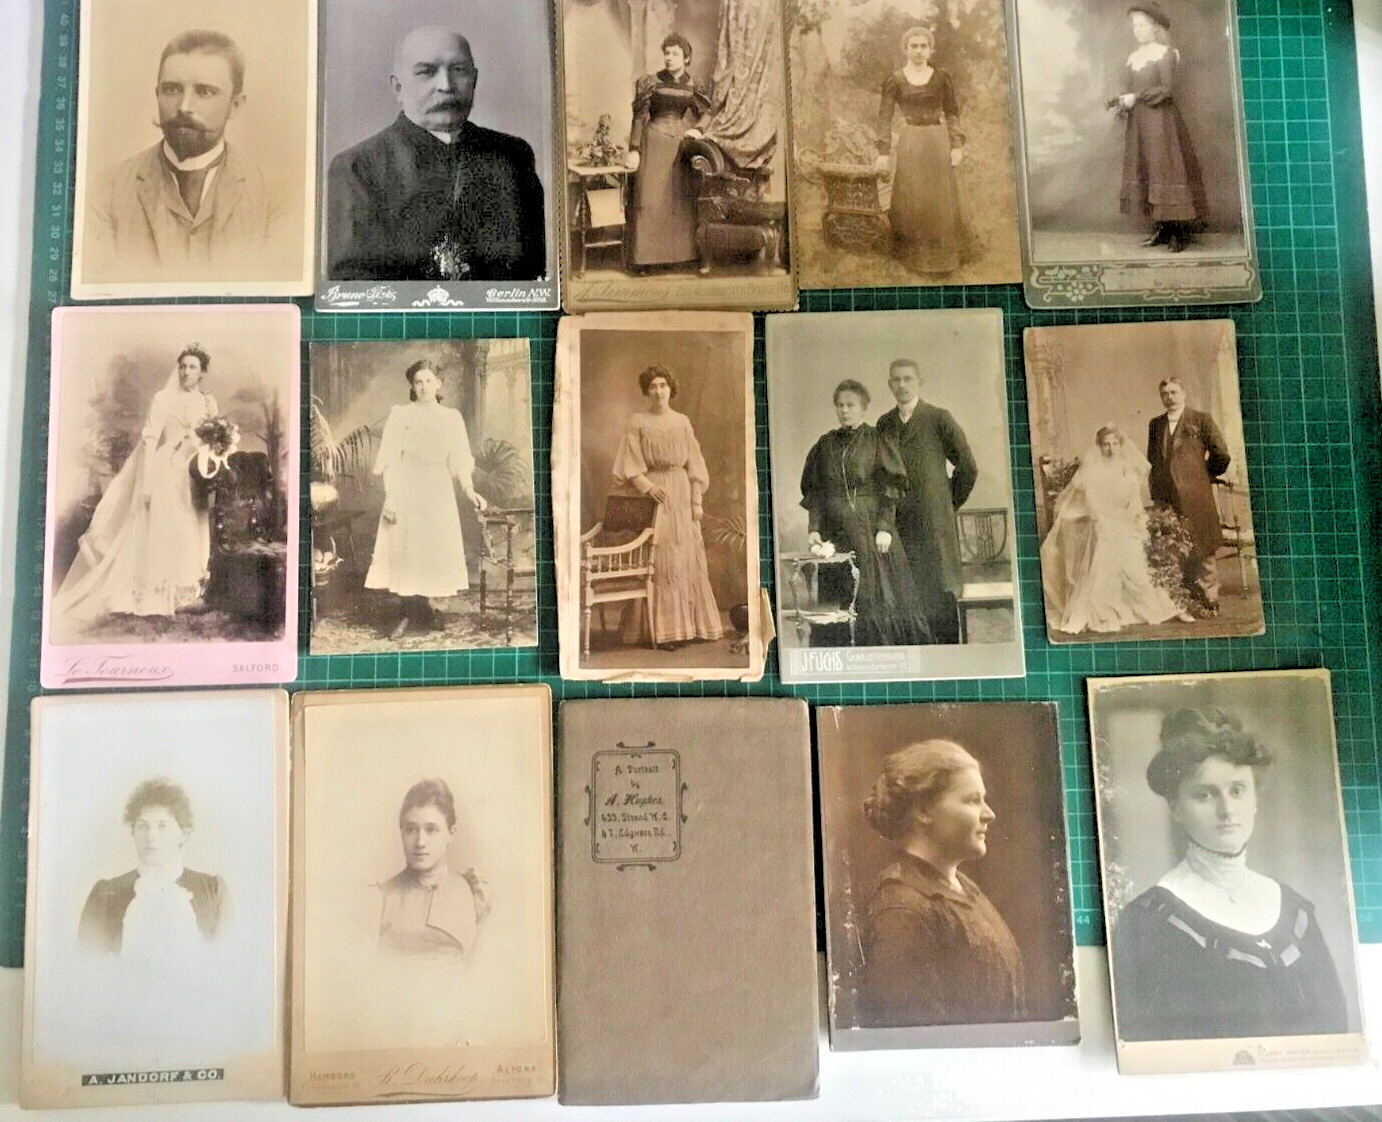 Large job lot of Cabinet/cdv cards - well over 100